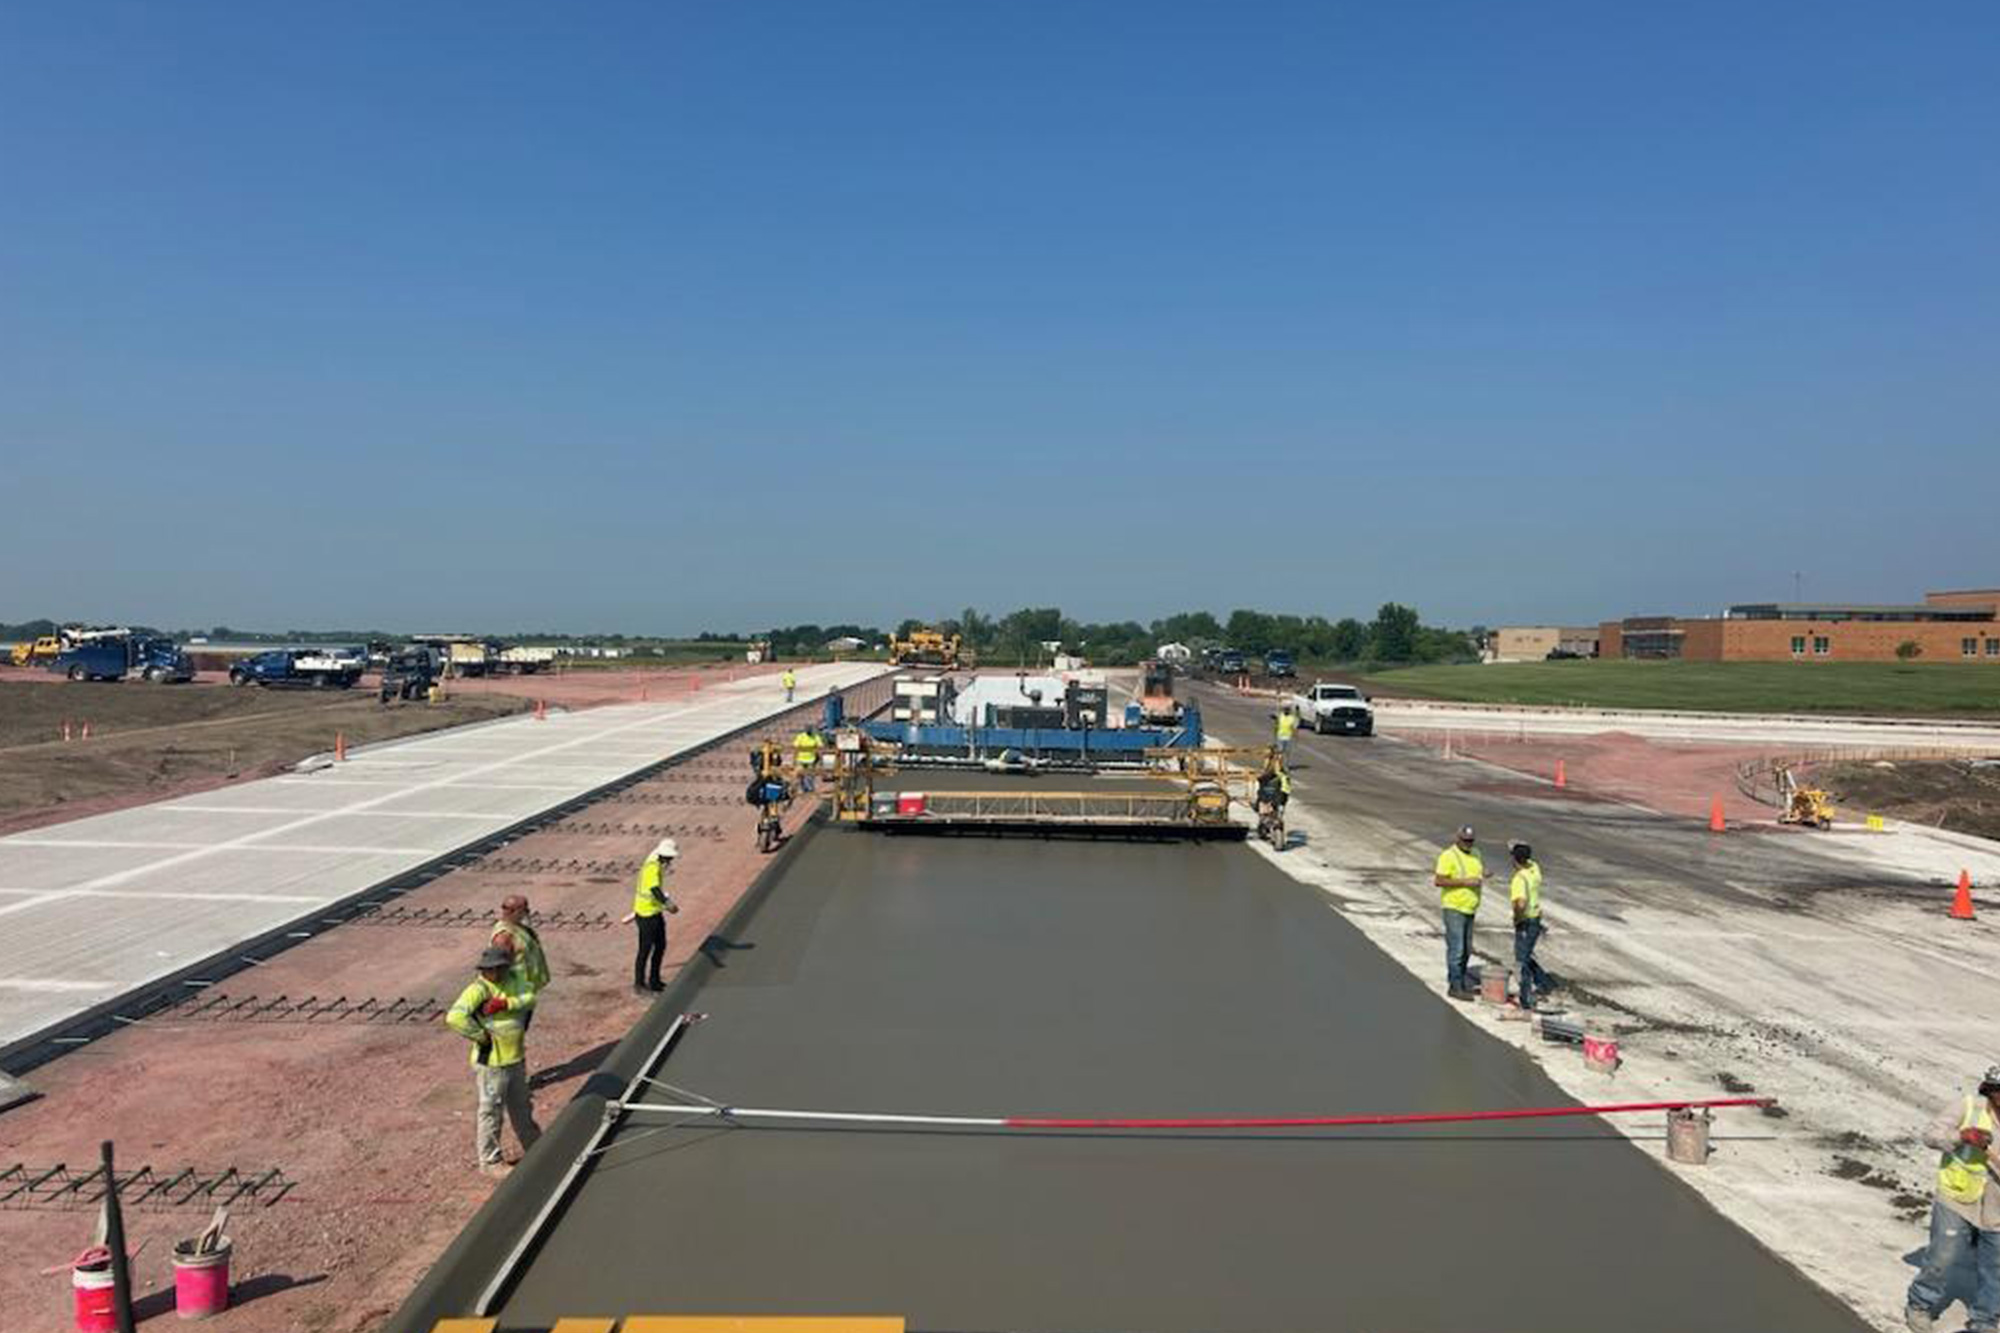 Construction workers leveling freshly poured concrete on new roadway surface.